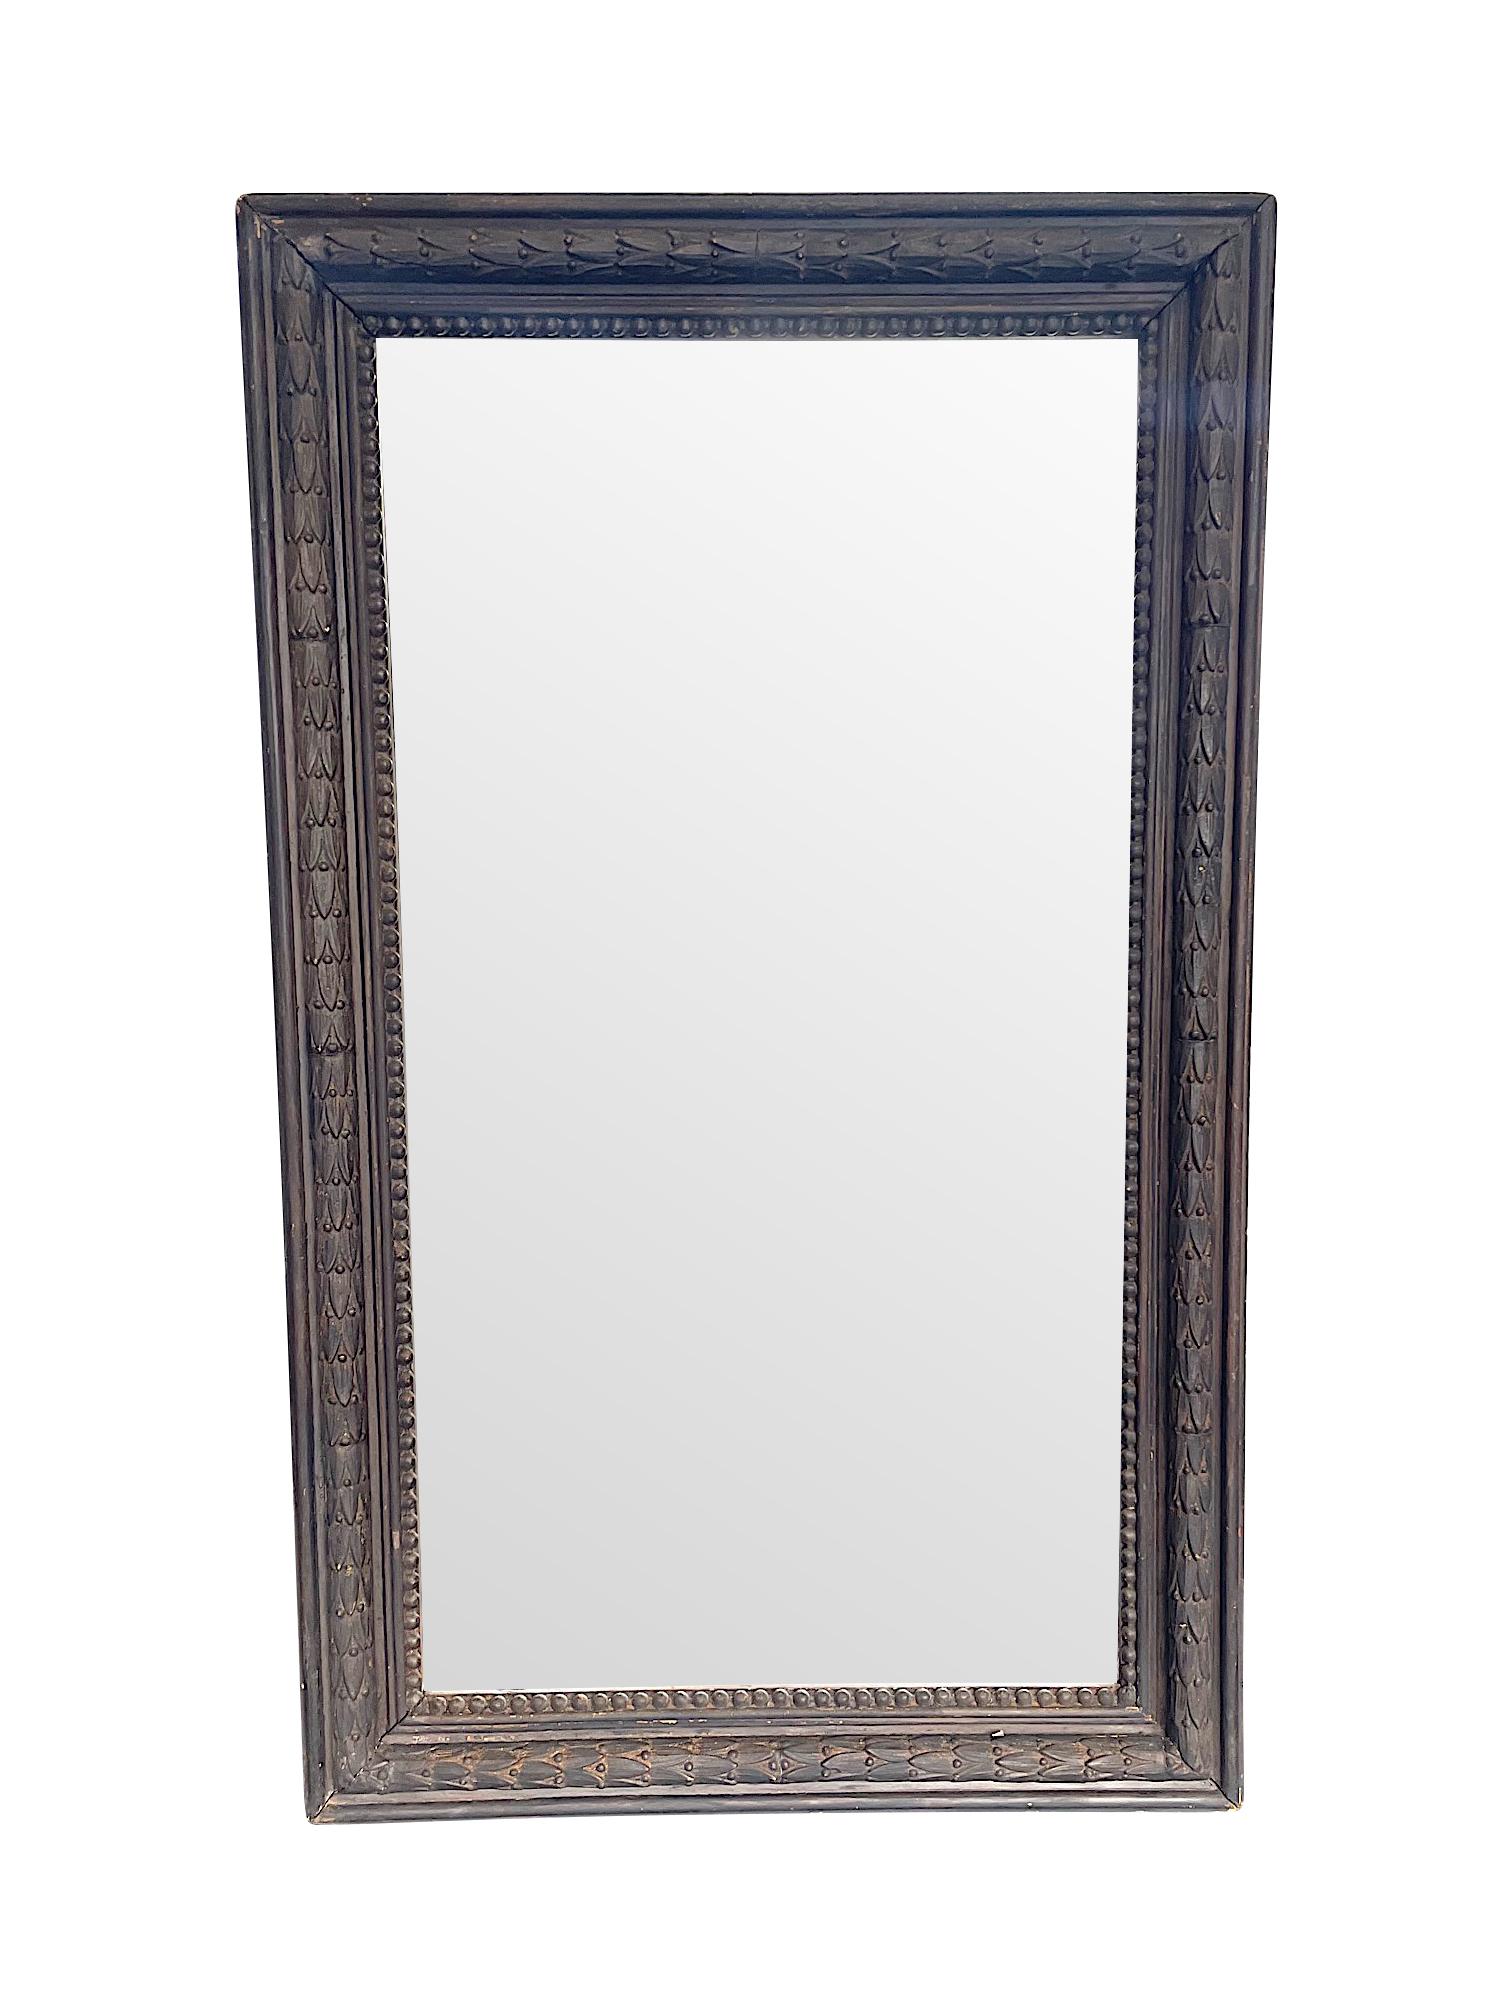 A 1900s French ebonzied Acanthus leaf mirror with moulded gesso acanthus leaf design set within a rectangular solid wood frame, with inside beaded wooden edge with original plate and solid wooden back. A well made piece, full of orignal character